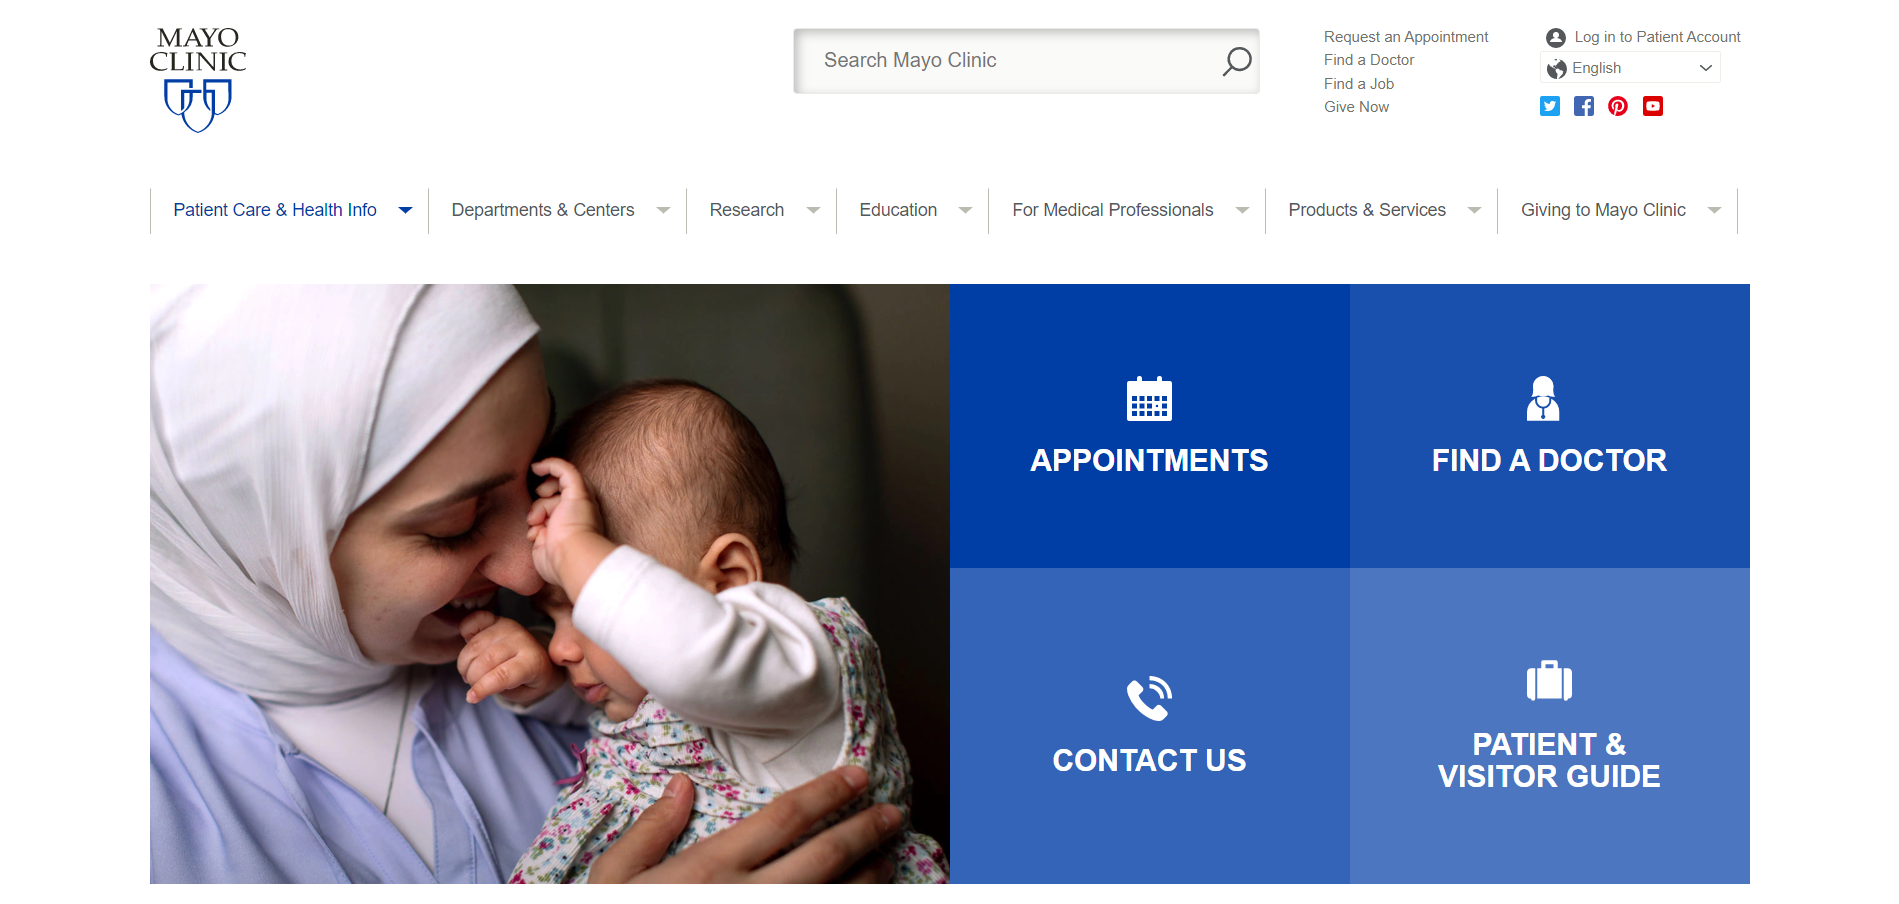 The Mayo Clinic Home Page